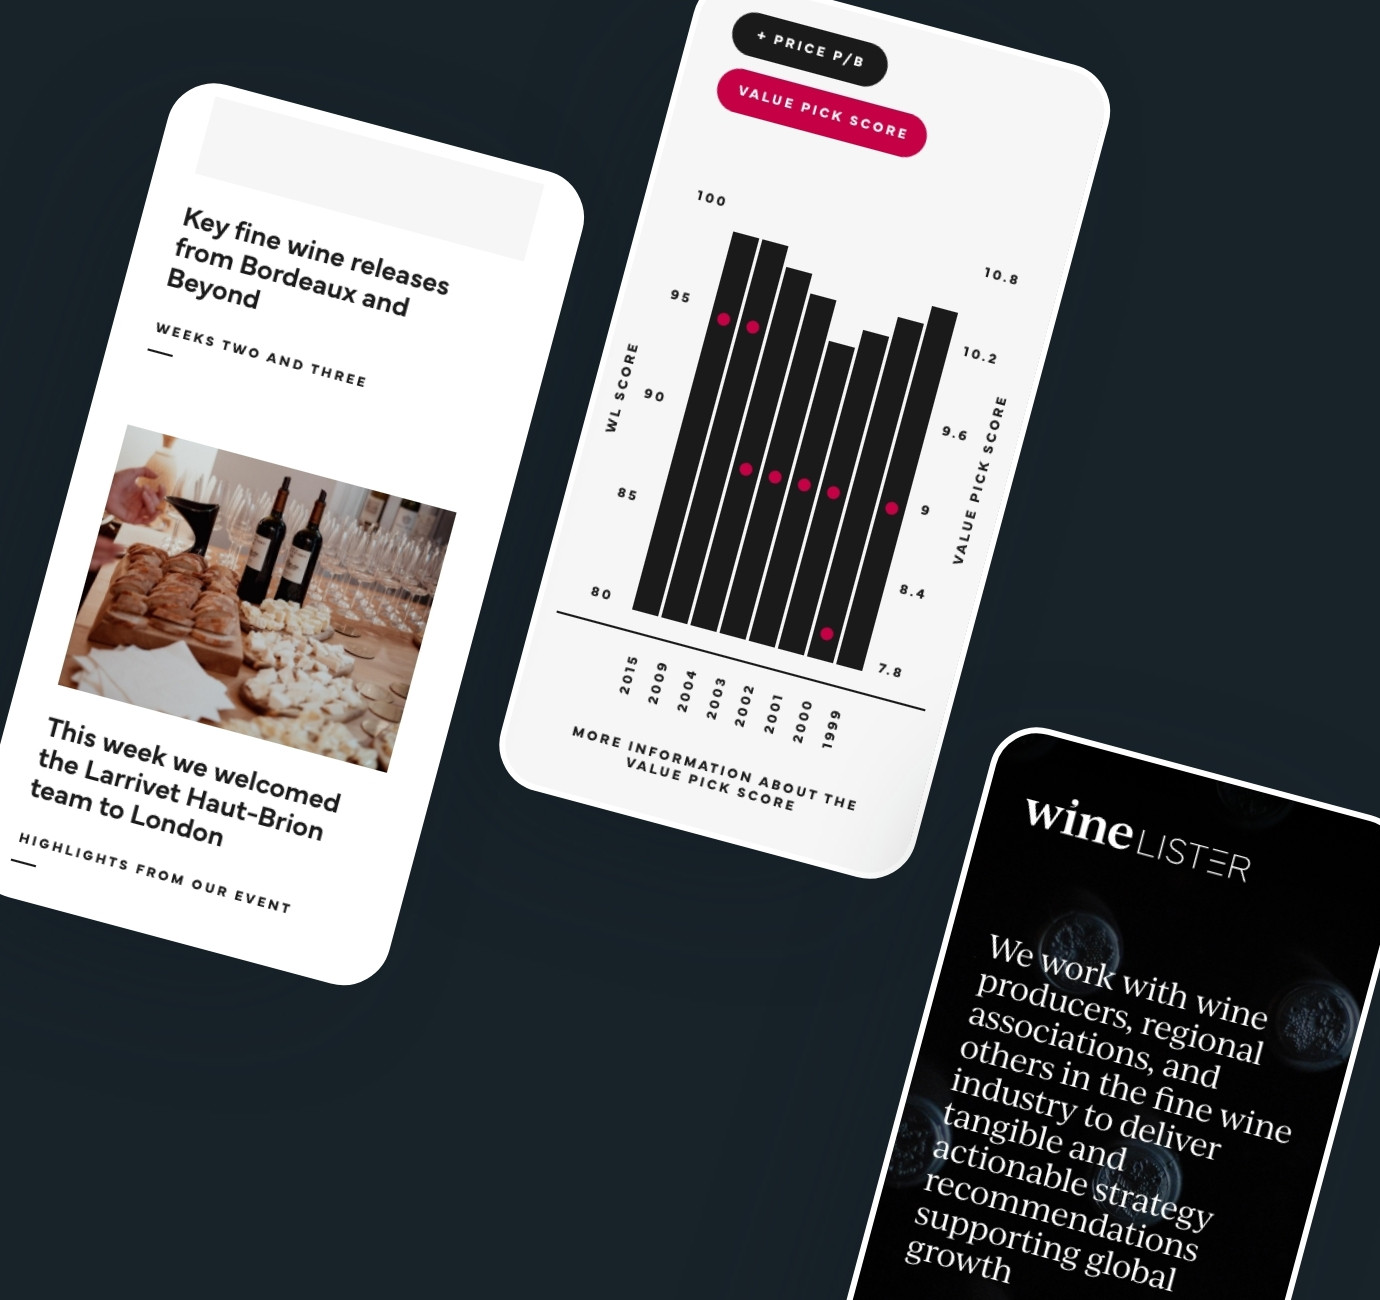 Wine Lister website design with stats, charts & analytics